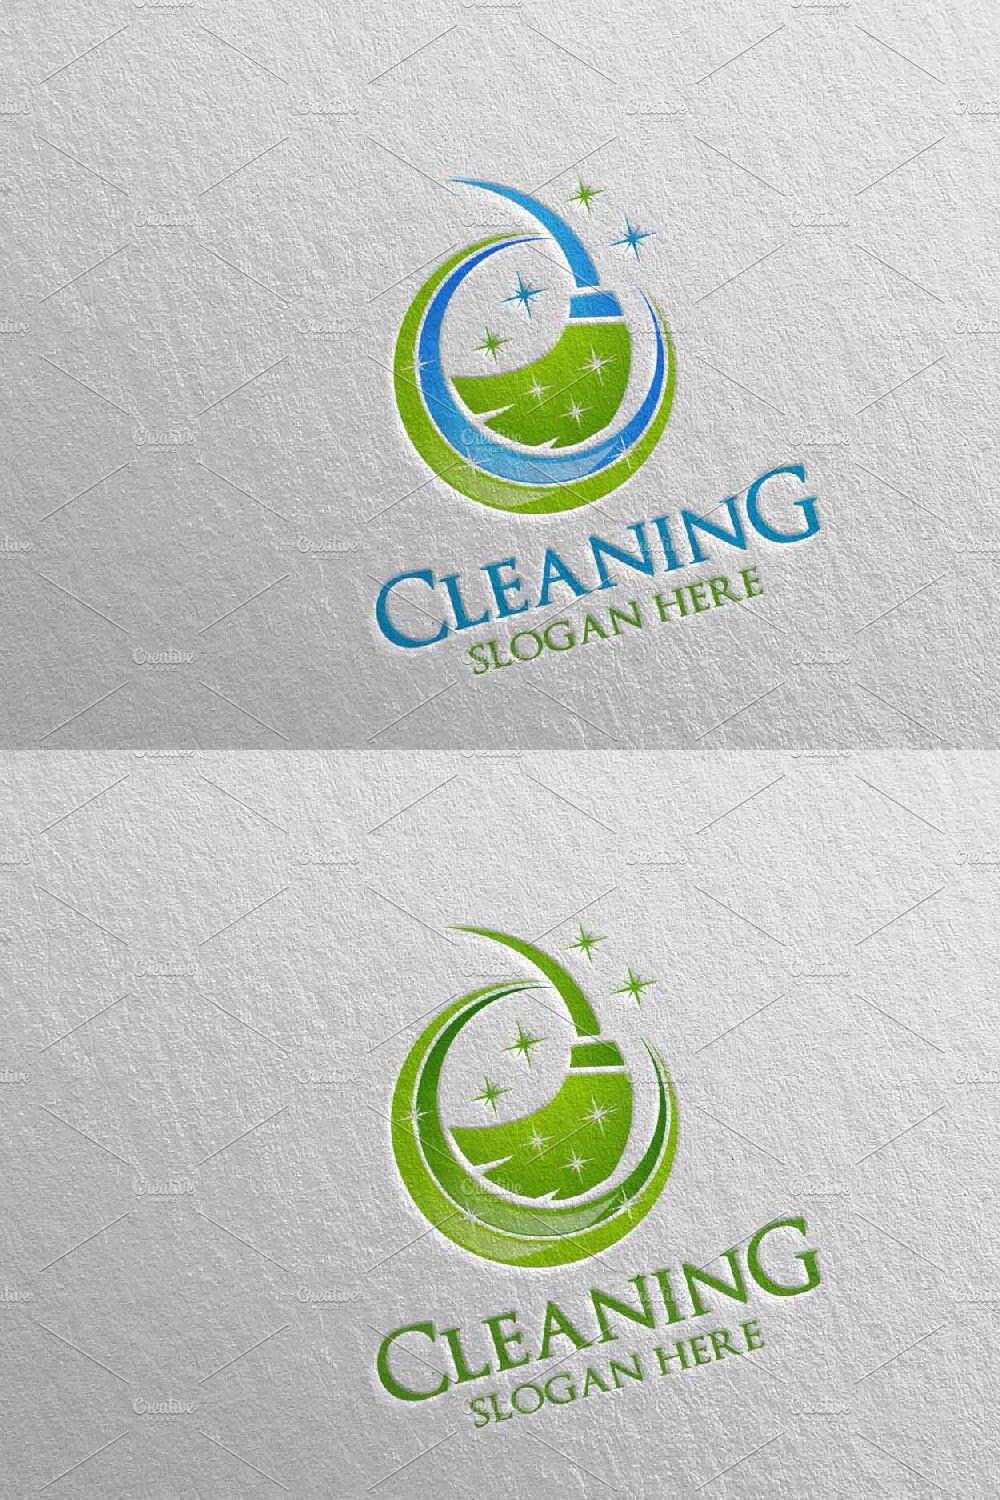 Cleaning Services Vector Logo pinterest preview image.